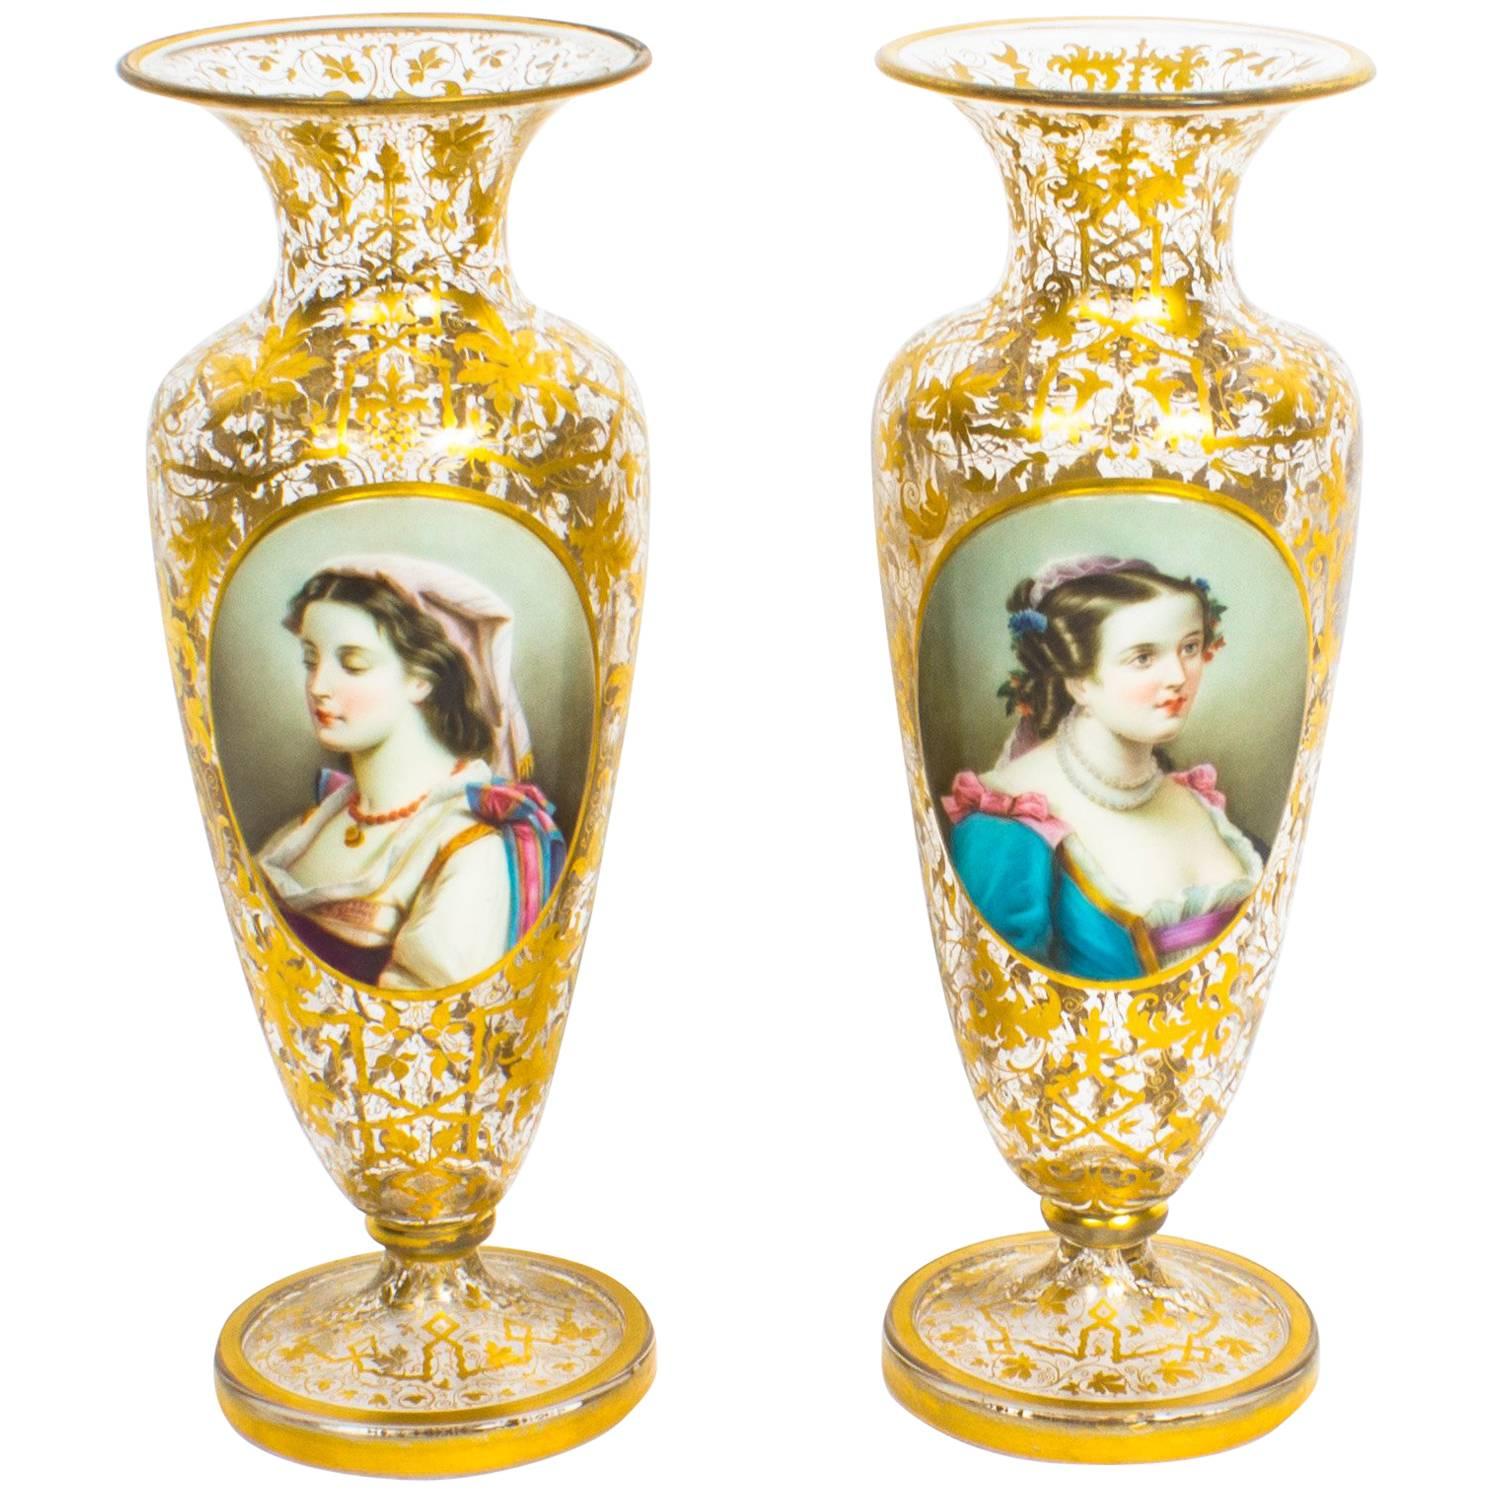 Pair of Bohemian Opaline Flashed Gilded Crystal Portrait Vases, 19th Century